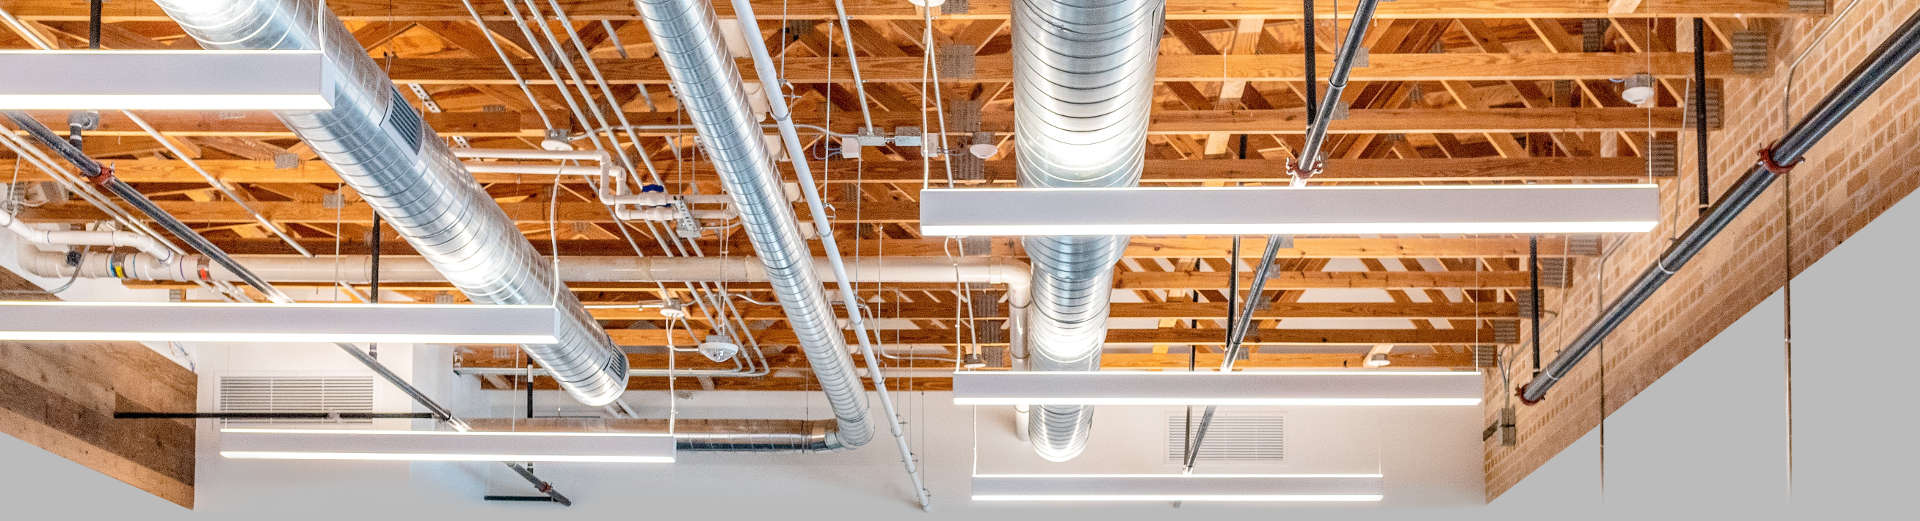 Ductwork and Plumbing